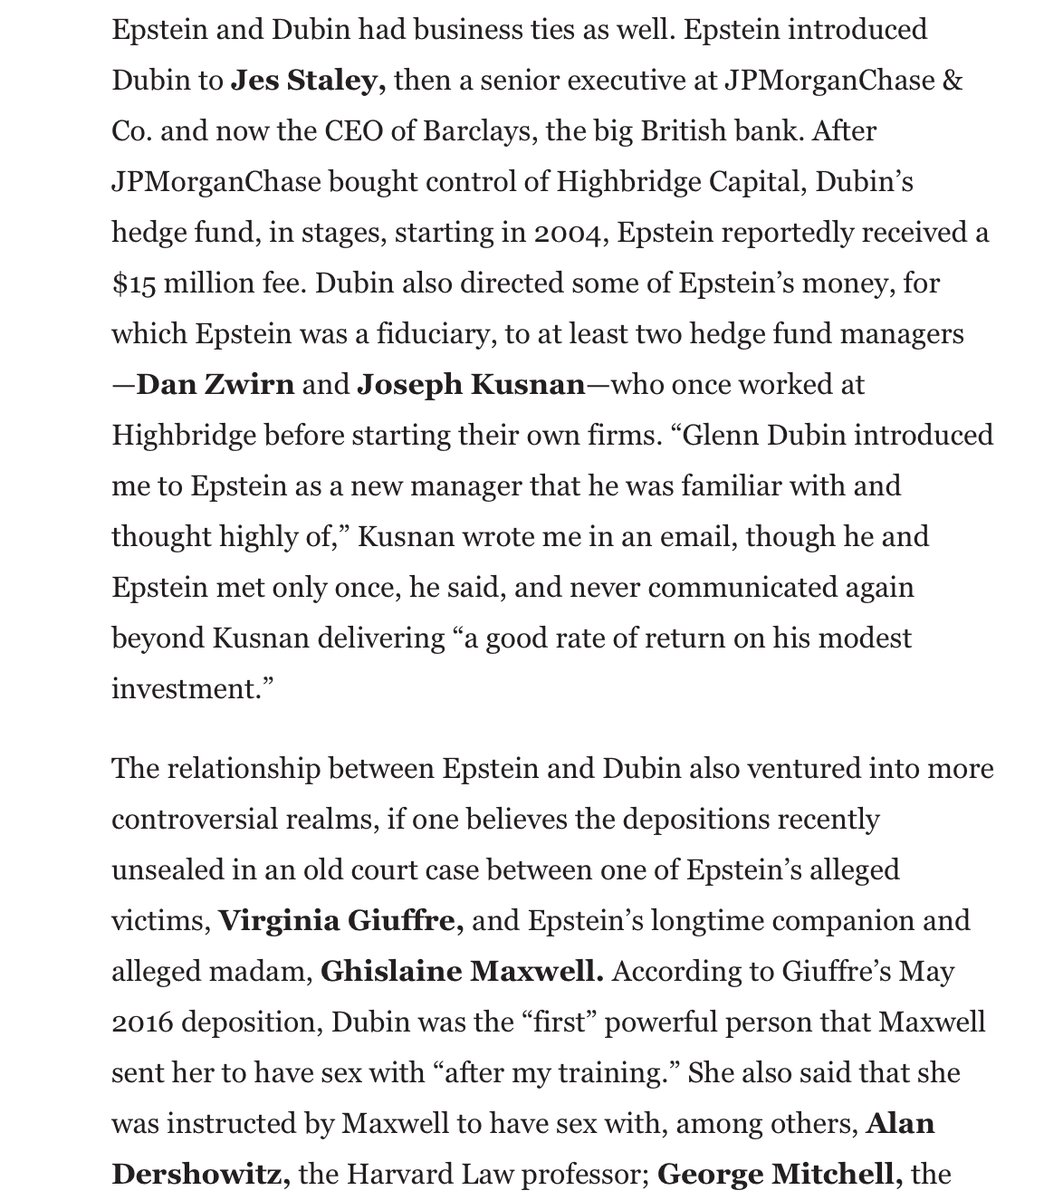 So One of the founders of Robinhood fndtn- Glenn, was not only close to Epstein, but his wife dated him, was Miss Sweden, a model b4 becoming a doctor. What a tangled web they have weaved. https://www.vanityfair.com/news/2019/09/glenn-dubin-epstein-questions